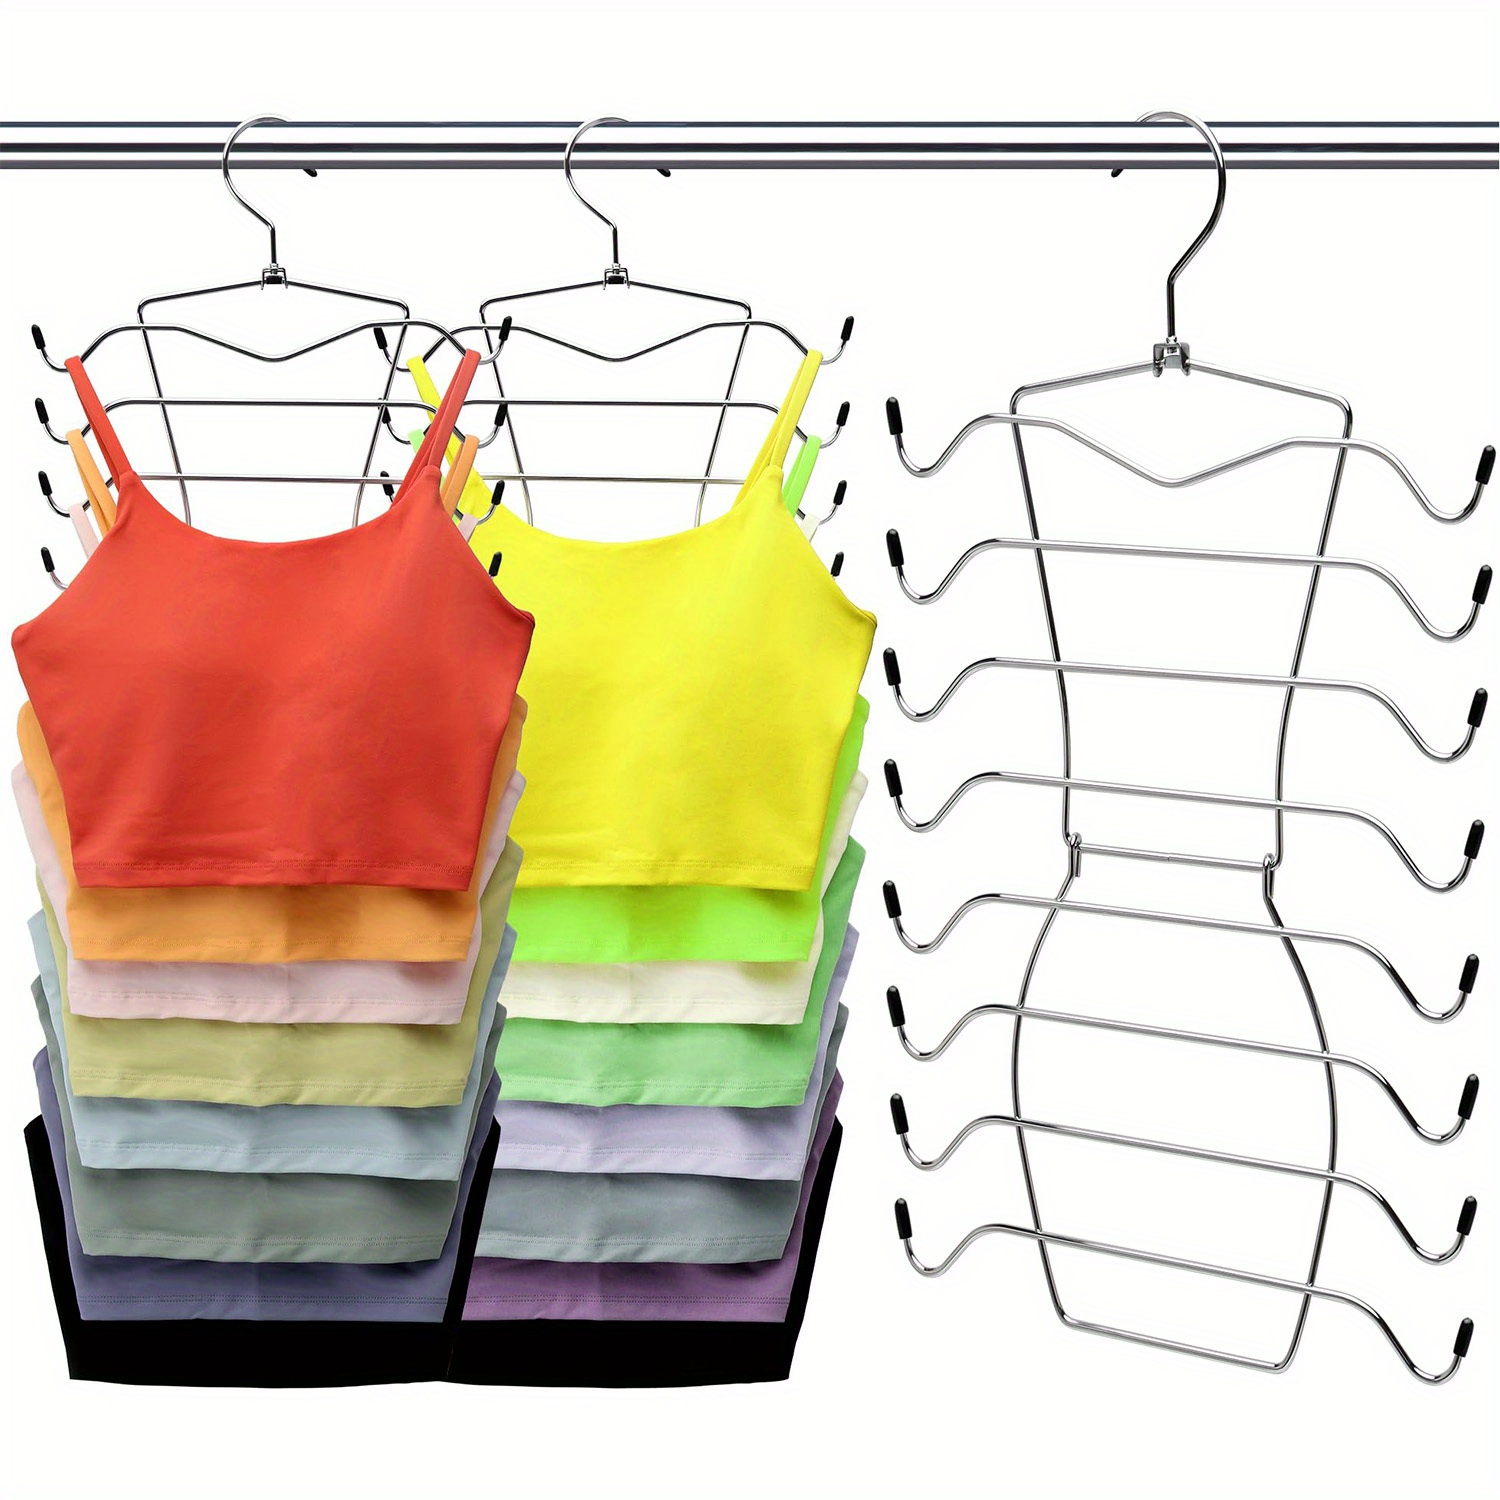 

2pcs Vest Hanger With Multi-layer, Space Saving Bra Rack, Non-slip Hanging Sport Bras Holder, Closet Organizers And Storage For Camisoles, Bras, Swimsuits